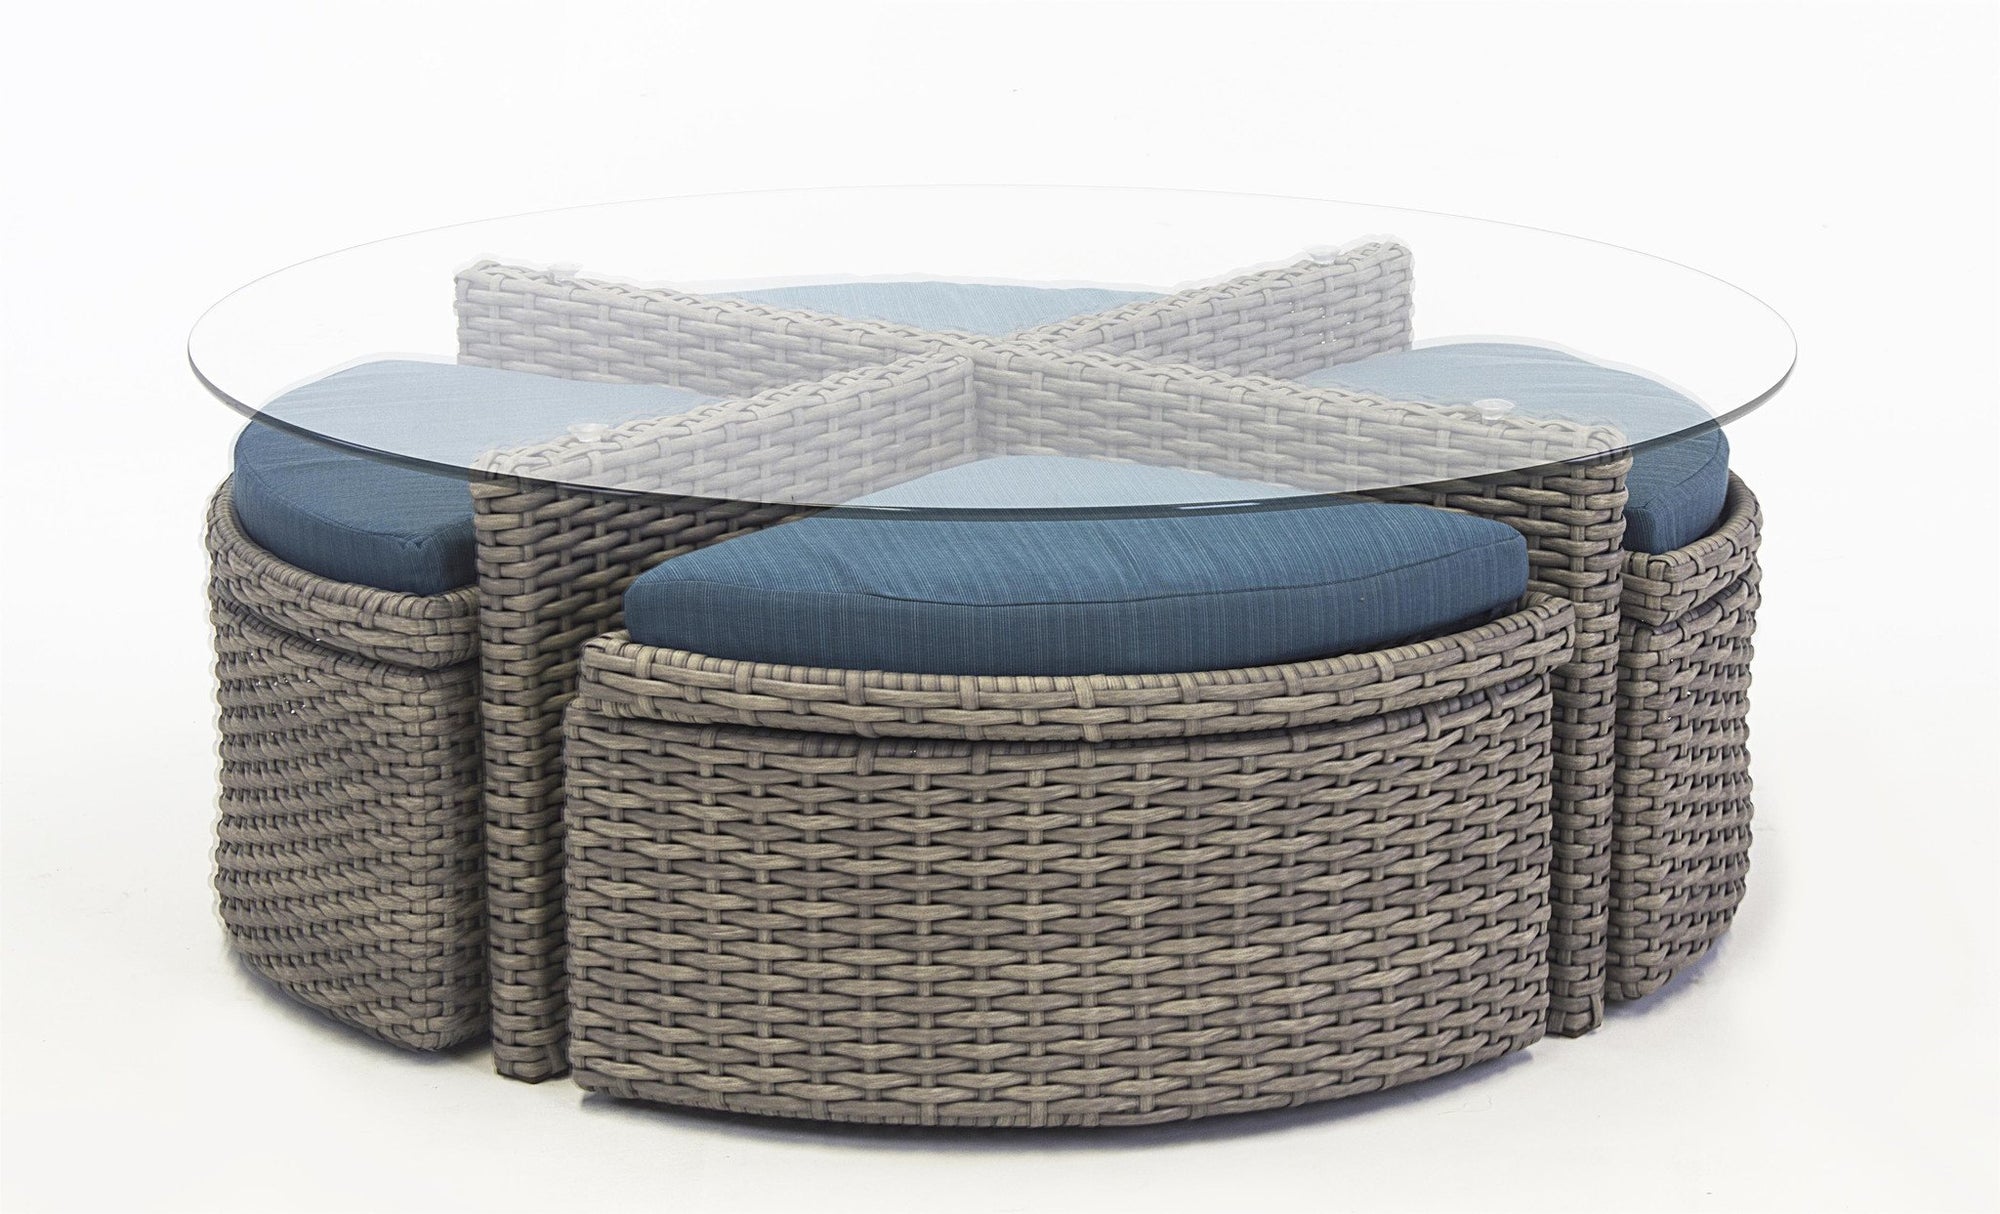 South Sea Rattan South Sea Rattan St. Tropez Round Sushi Table with Ottomans Sushi Table - Rattan Imports